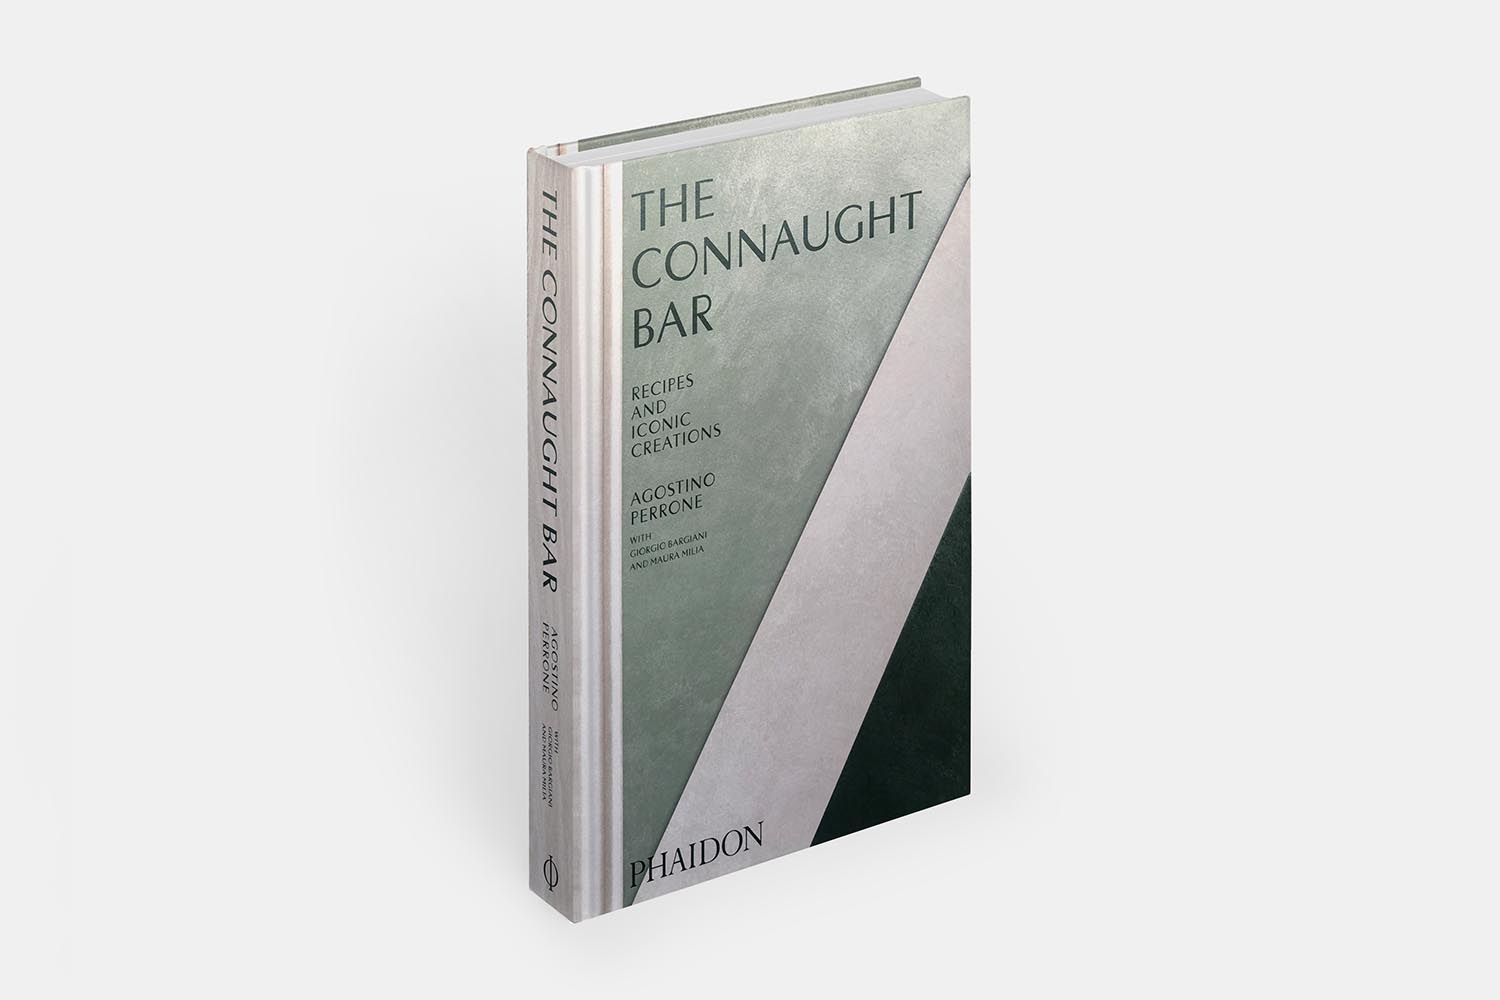 The cover of "The Connaught Bar"